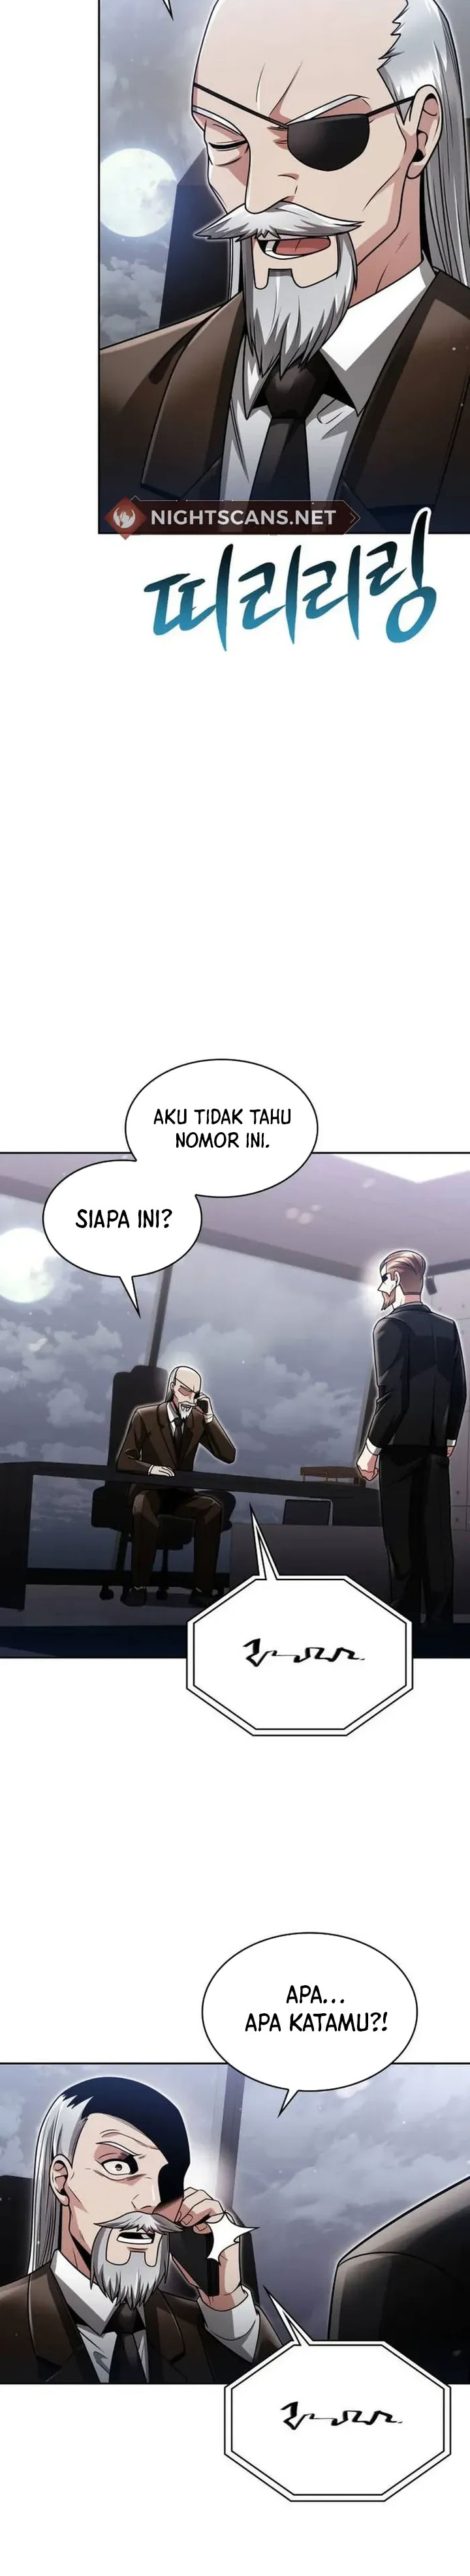 Dilarang COPAS - situs resmi www.mangacanblog.com - Komik clever cleaning life of the returned genius hunter 058 - chapter 58 59 Indonesia clever cleaning life of the returned genius hunter 058 - chapter 58 Terbaru 32|Baca Manga Komik Indonesia|Mangacan